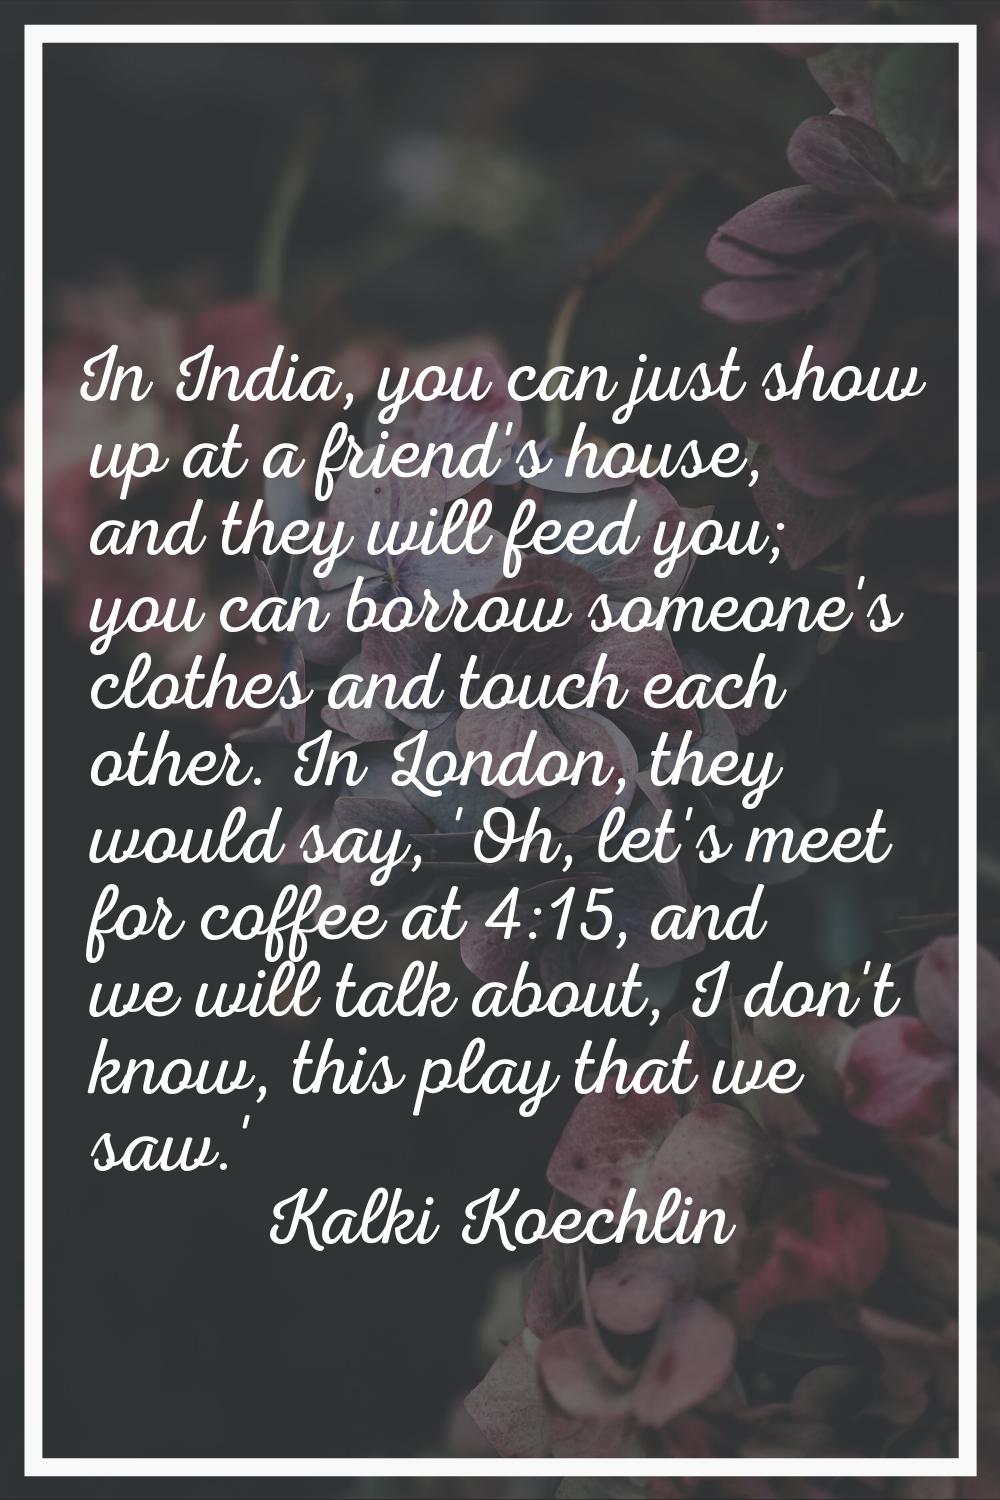 In India, you can just show up at a friend's house, and they will feed you; you can borrow someone'